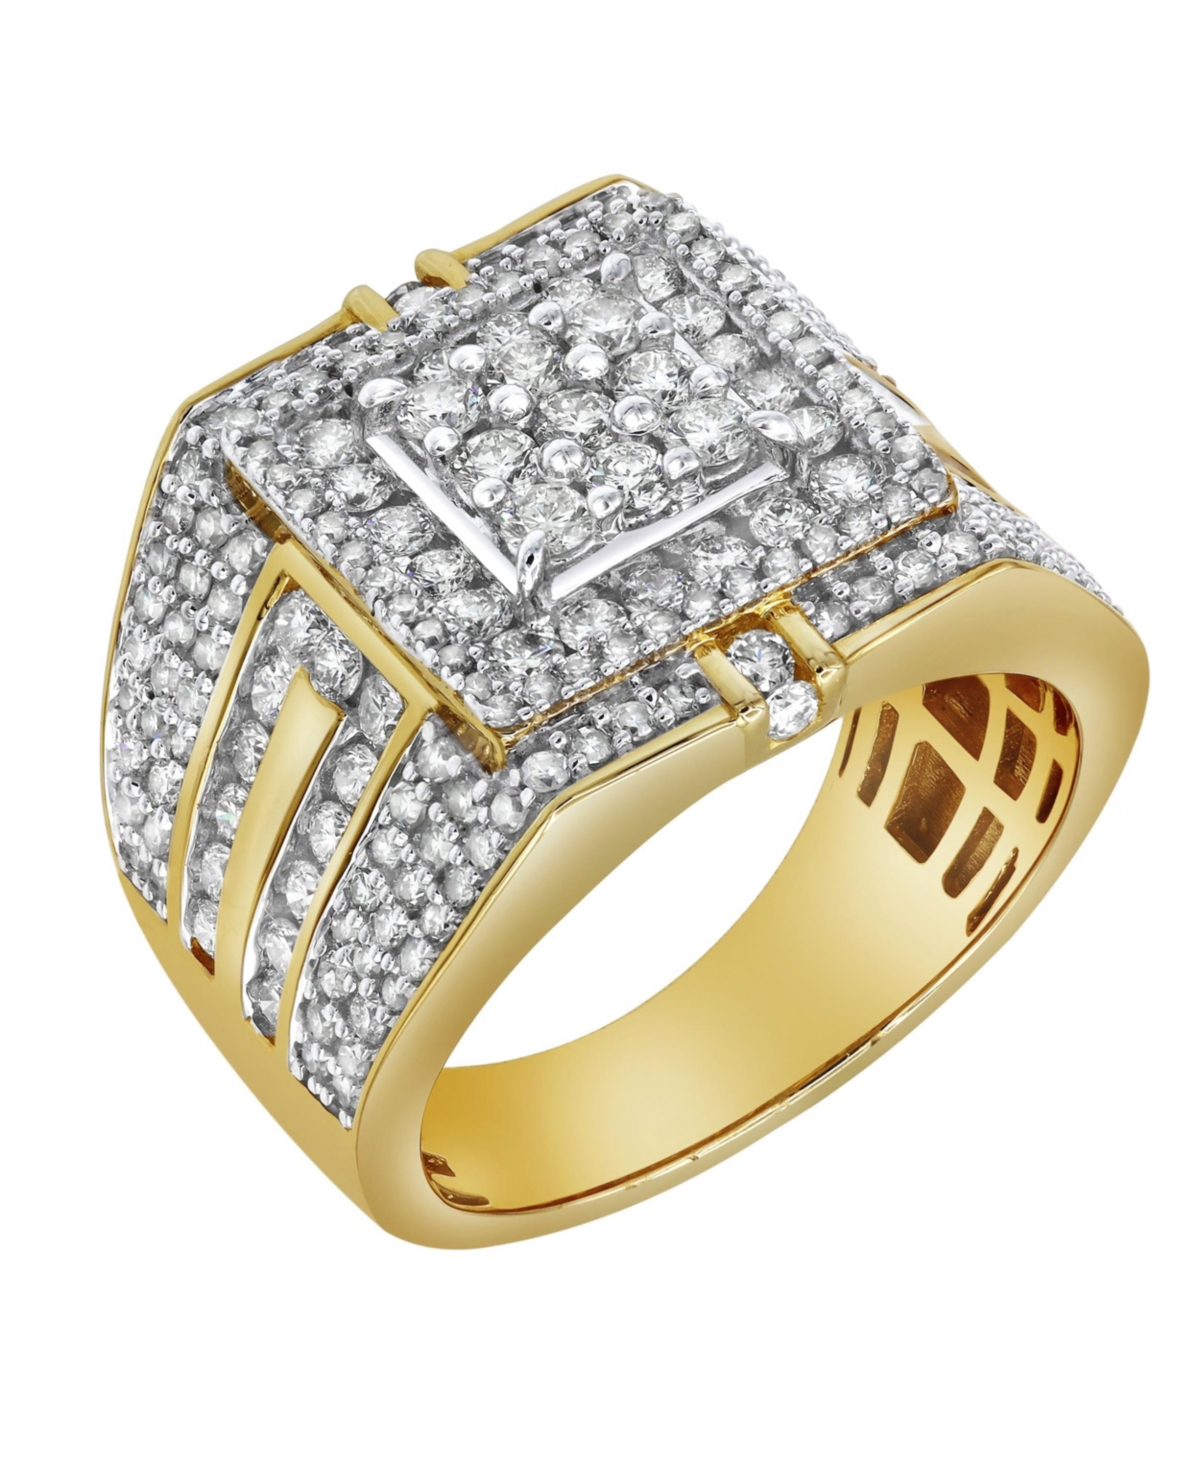 Ringside Shine Natural Certified Diamond 2.5 cttw Round Cut 14k Yellow Gold Statement Ring for Men - Yellow